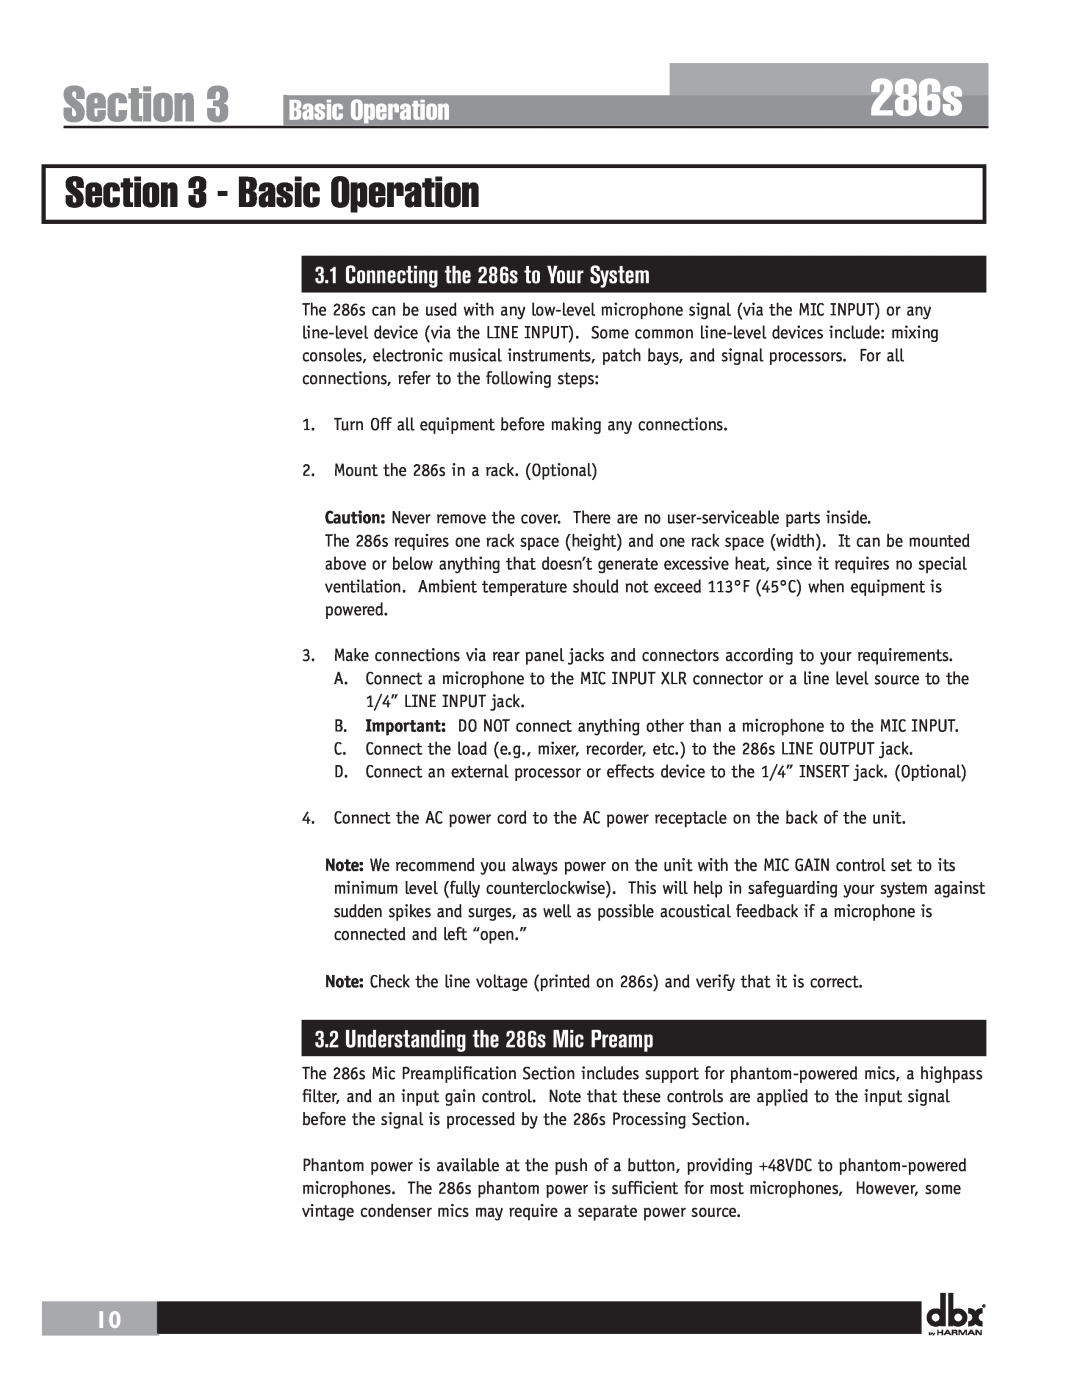 Harman user manual Basic Operation, Connecting the 286s to Your System, Understanding the 286s Mic Preamp, Section 